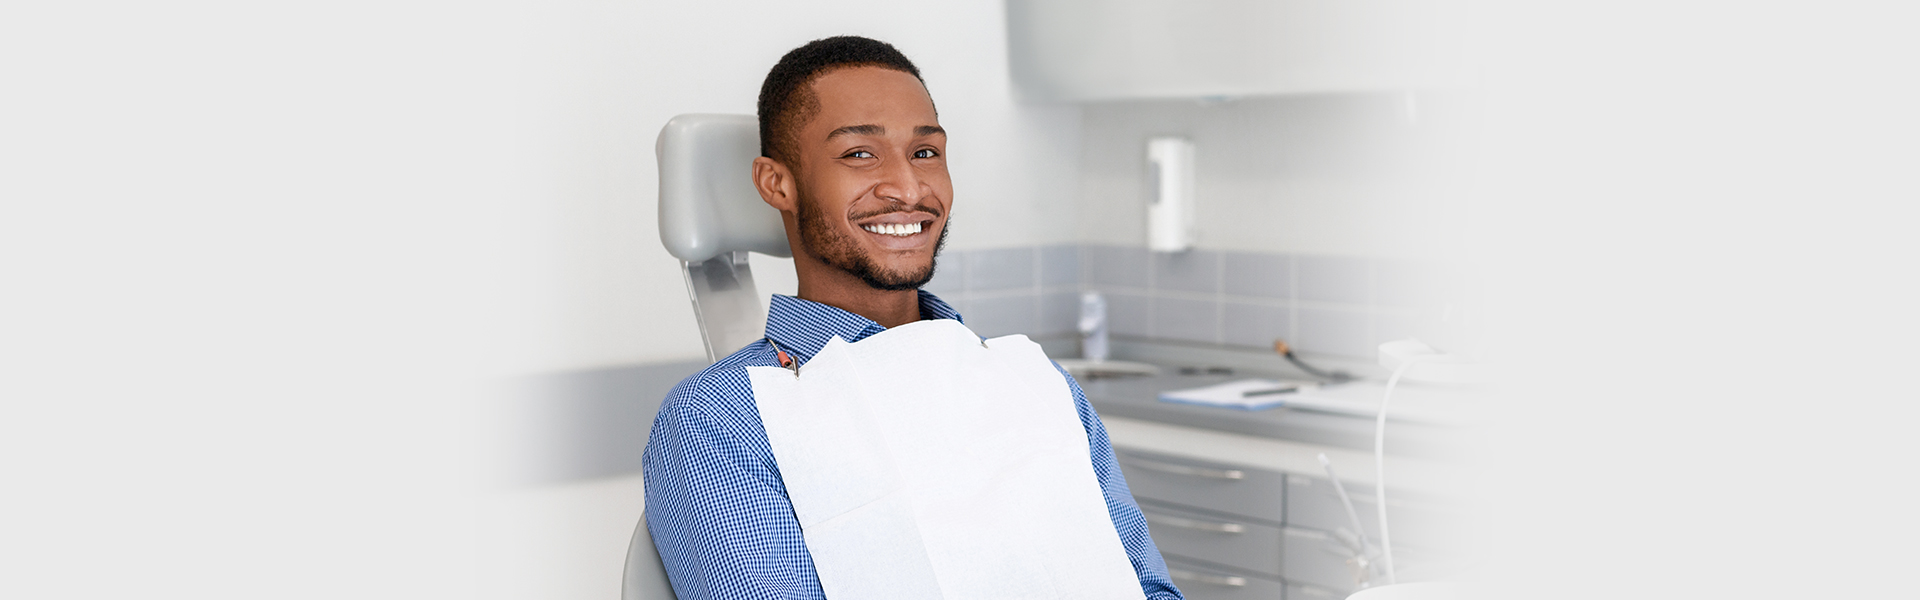 5 Things to Consider Before Getting Teeth Implants with Diabetes